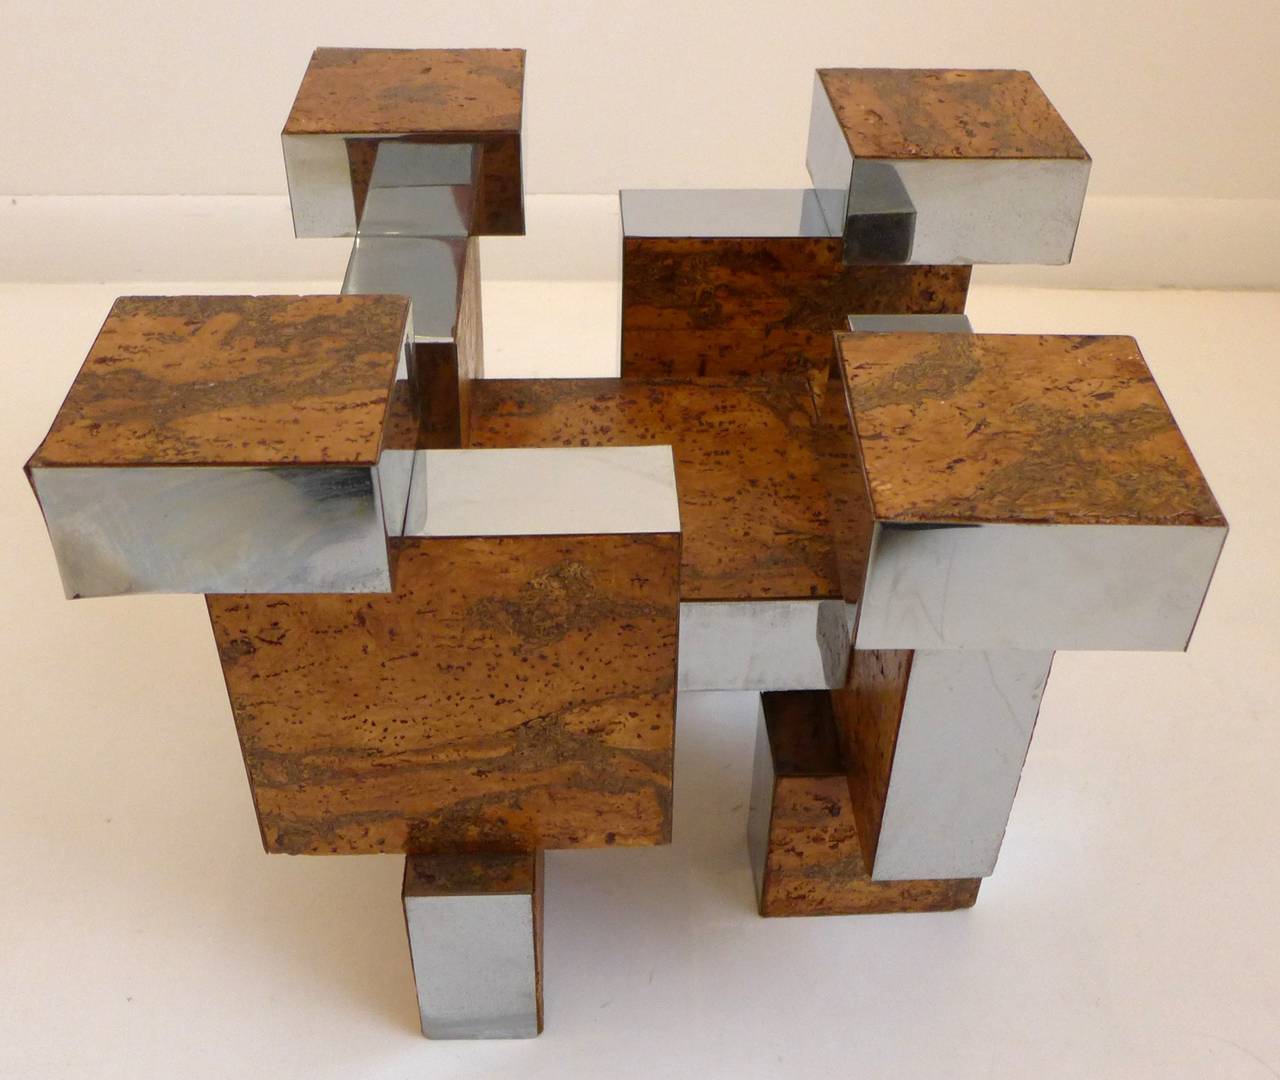 Brutalist cocktail or side table base, comprised of vertical and horizontal blocks of wood clad in chromed metal and olive burl cork veneer.  An architecturally sculptural form, executed c. 1960's, in the style of Paul Evans' Cityscape series. Sold